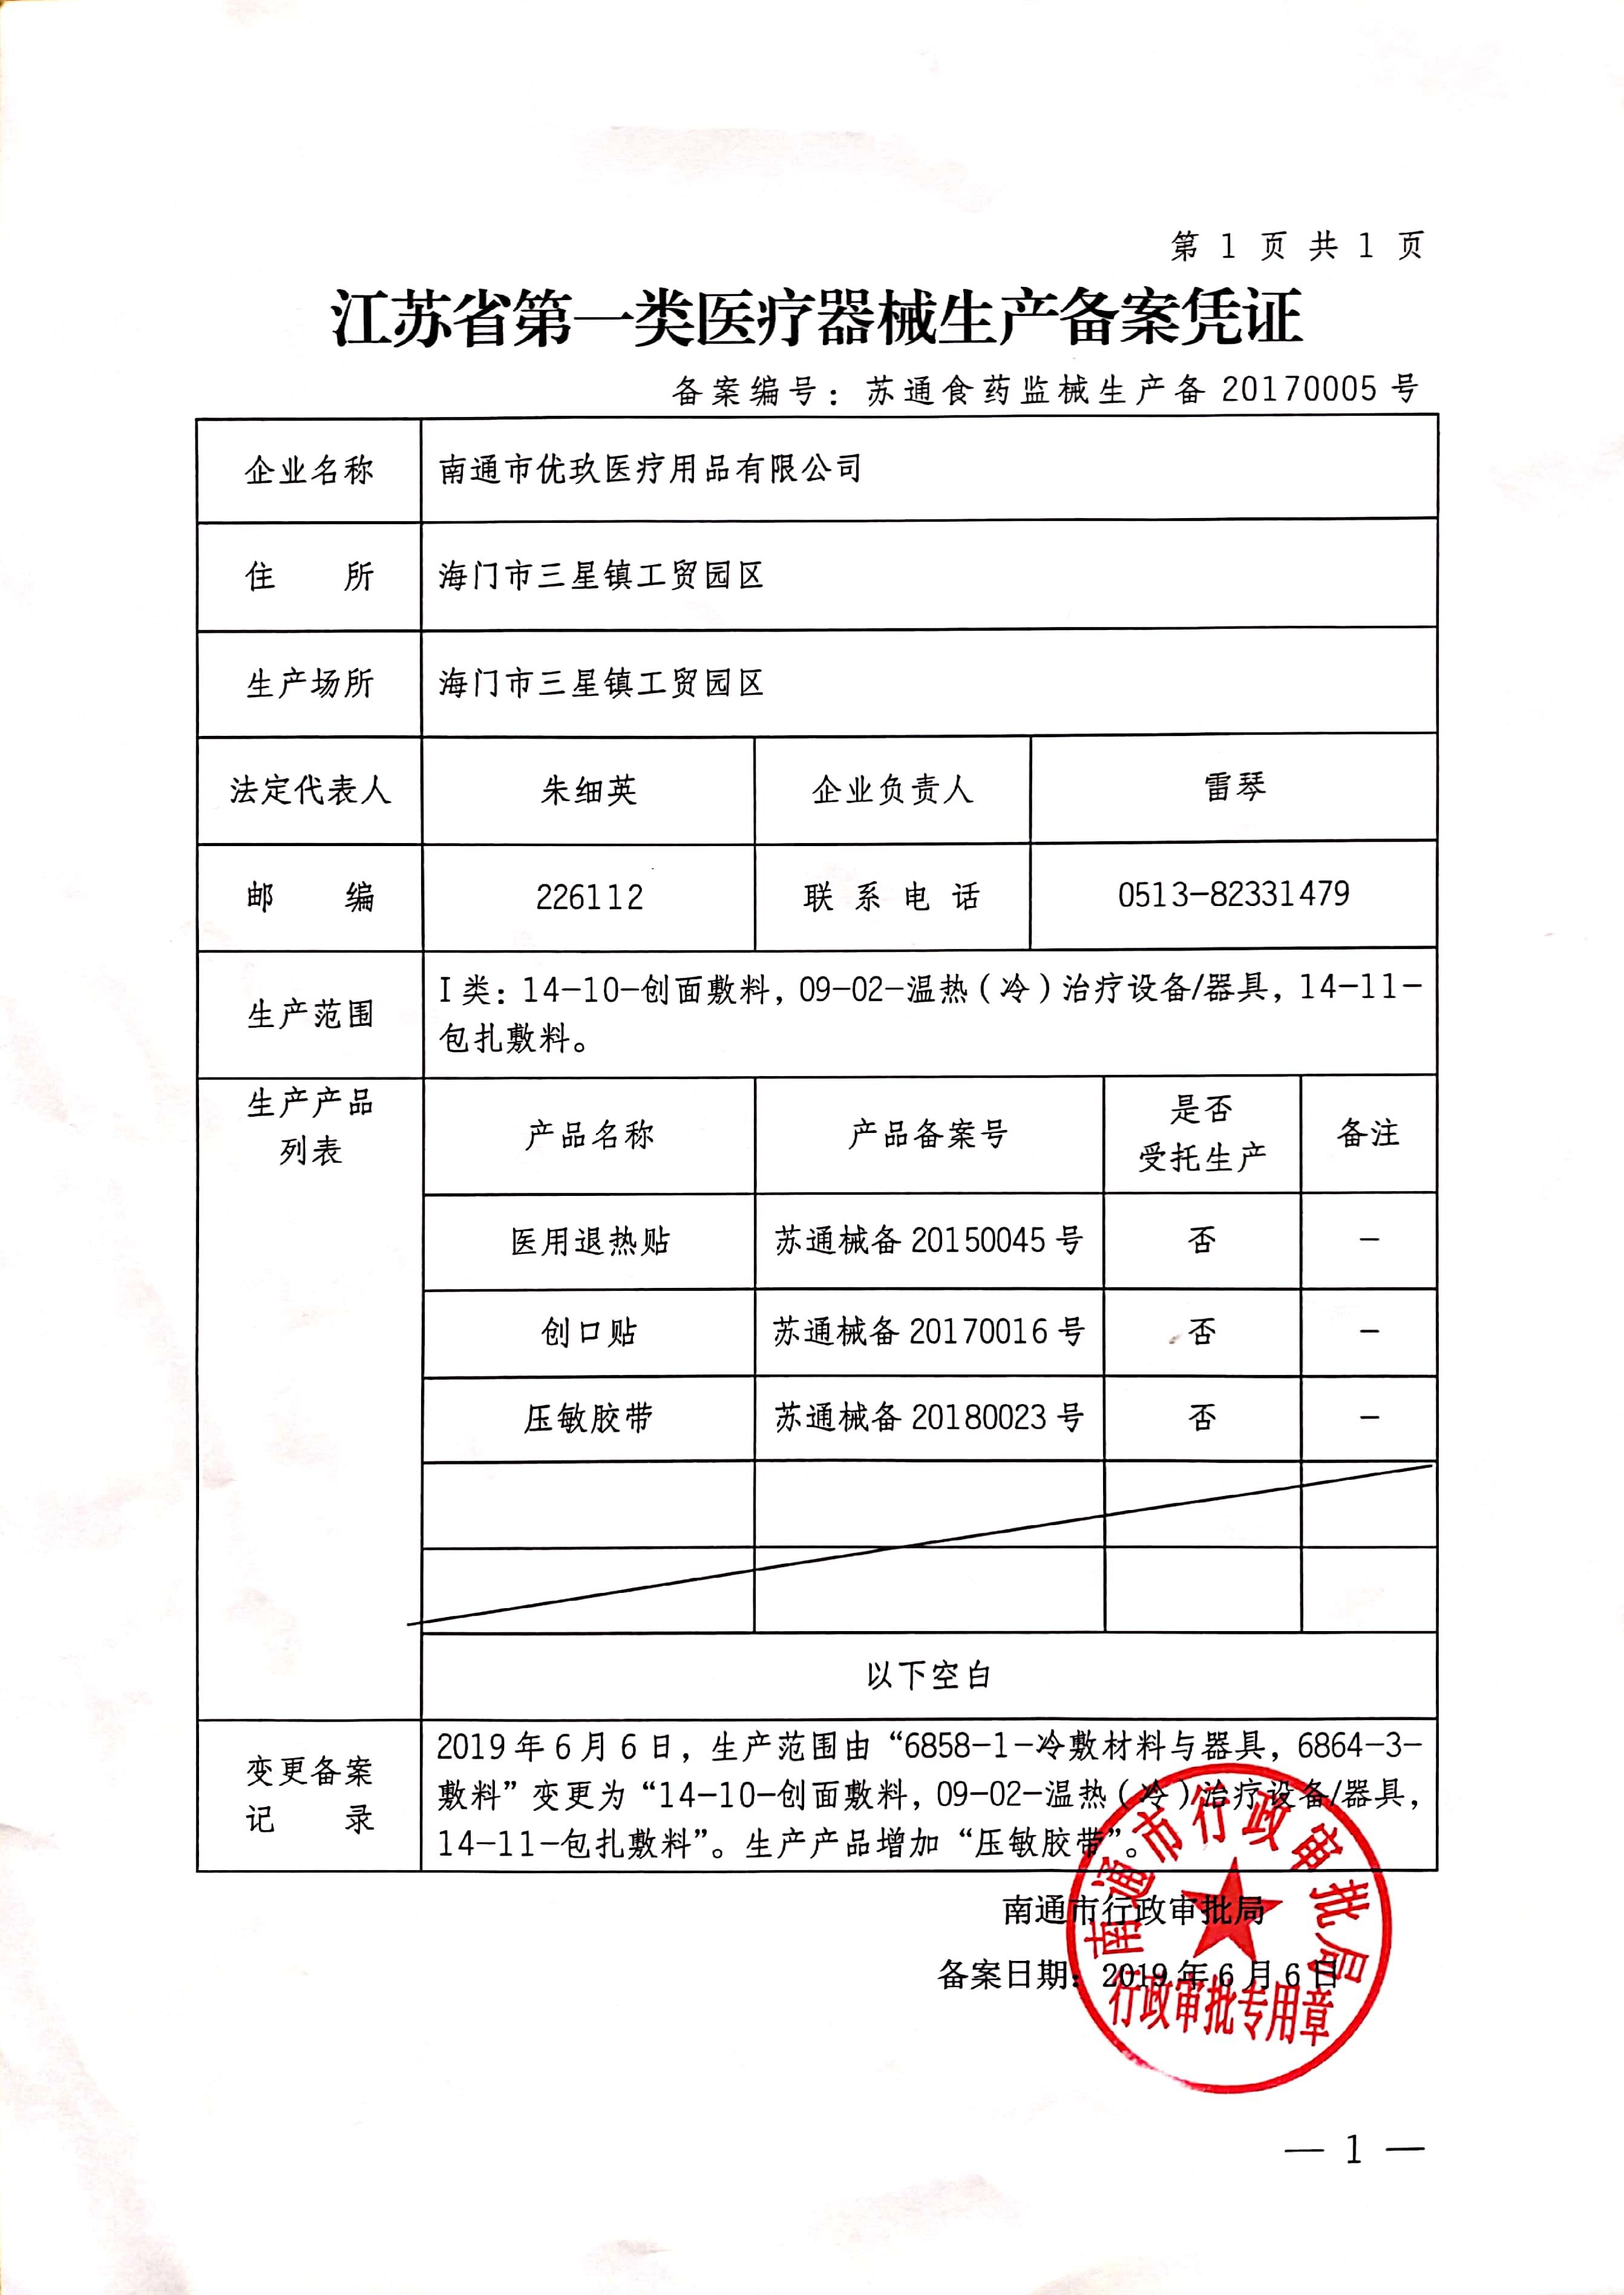 Product Production Record Certificate